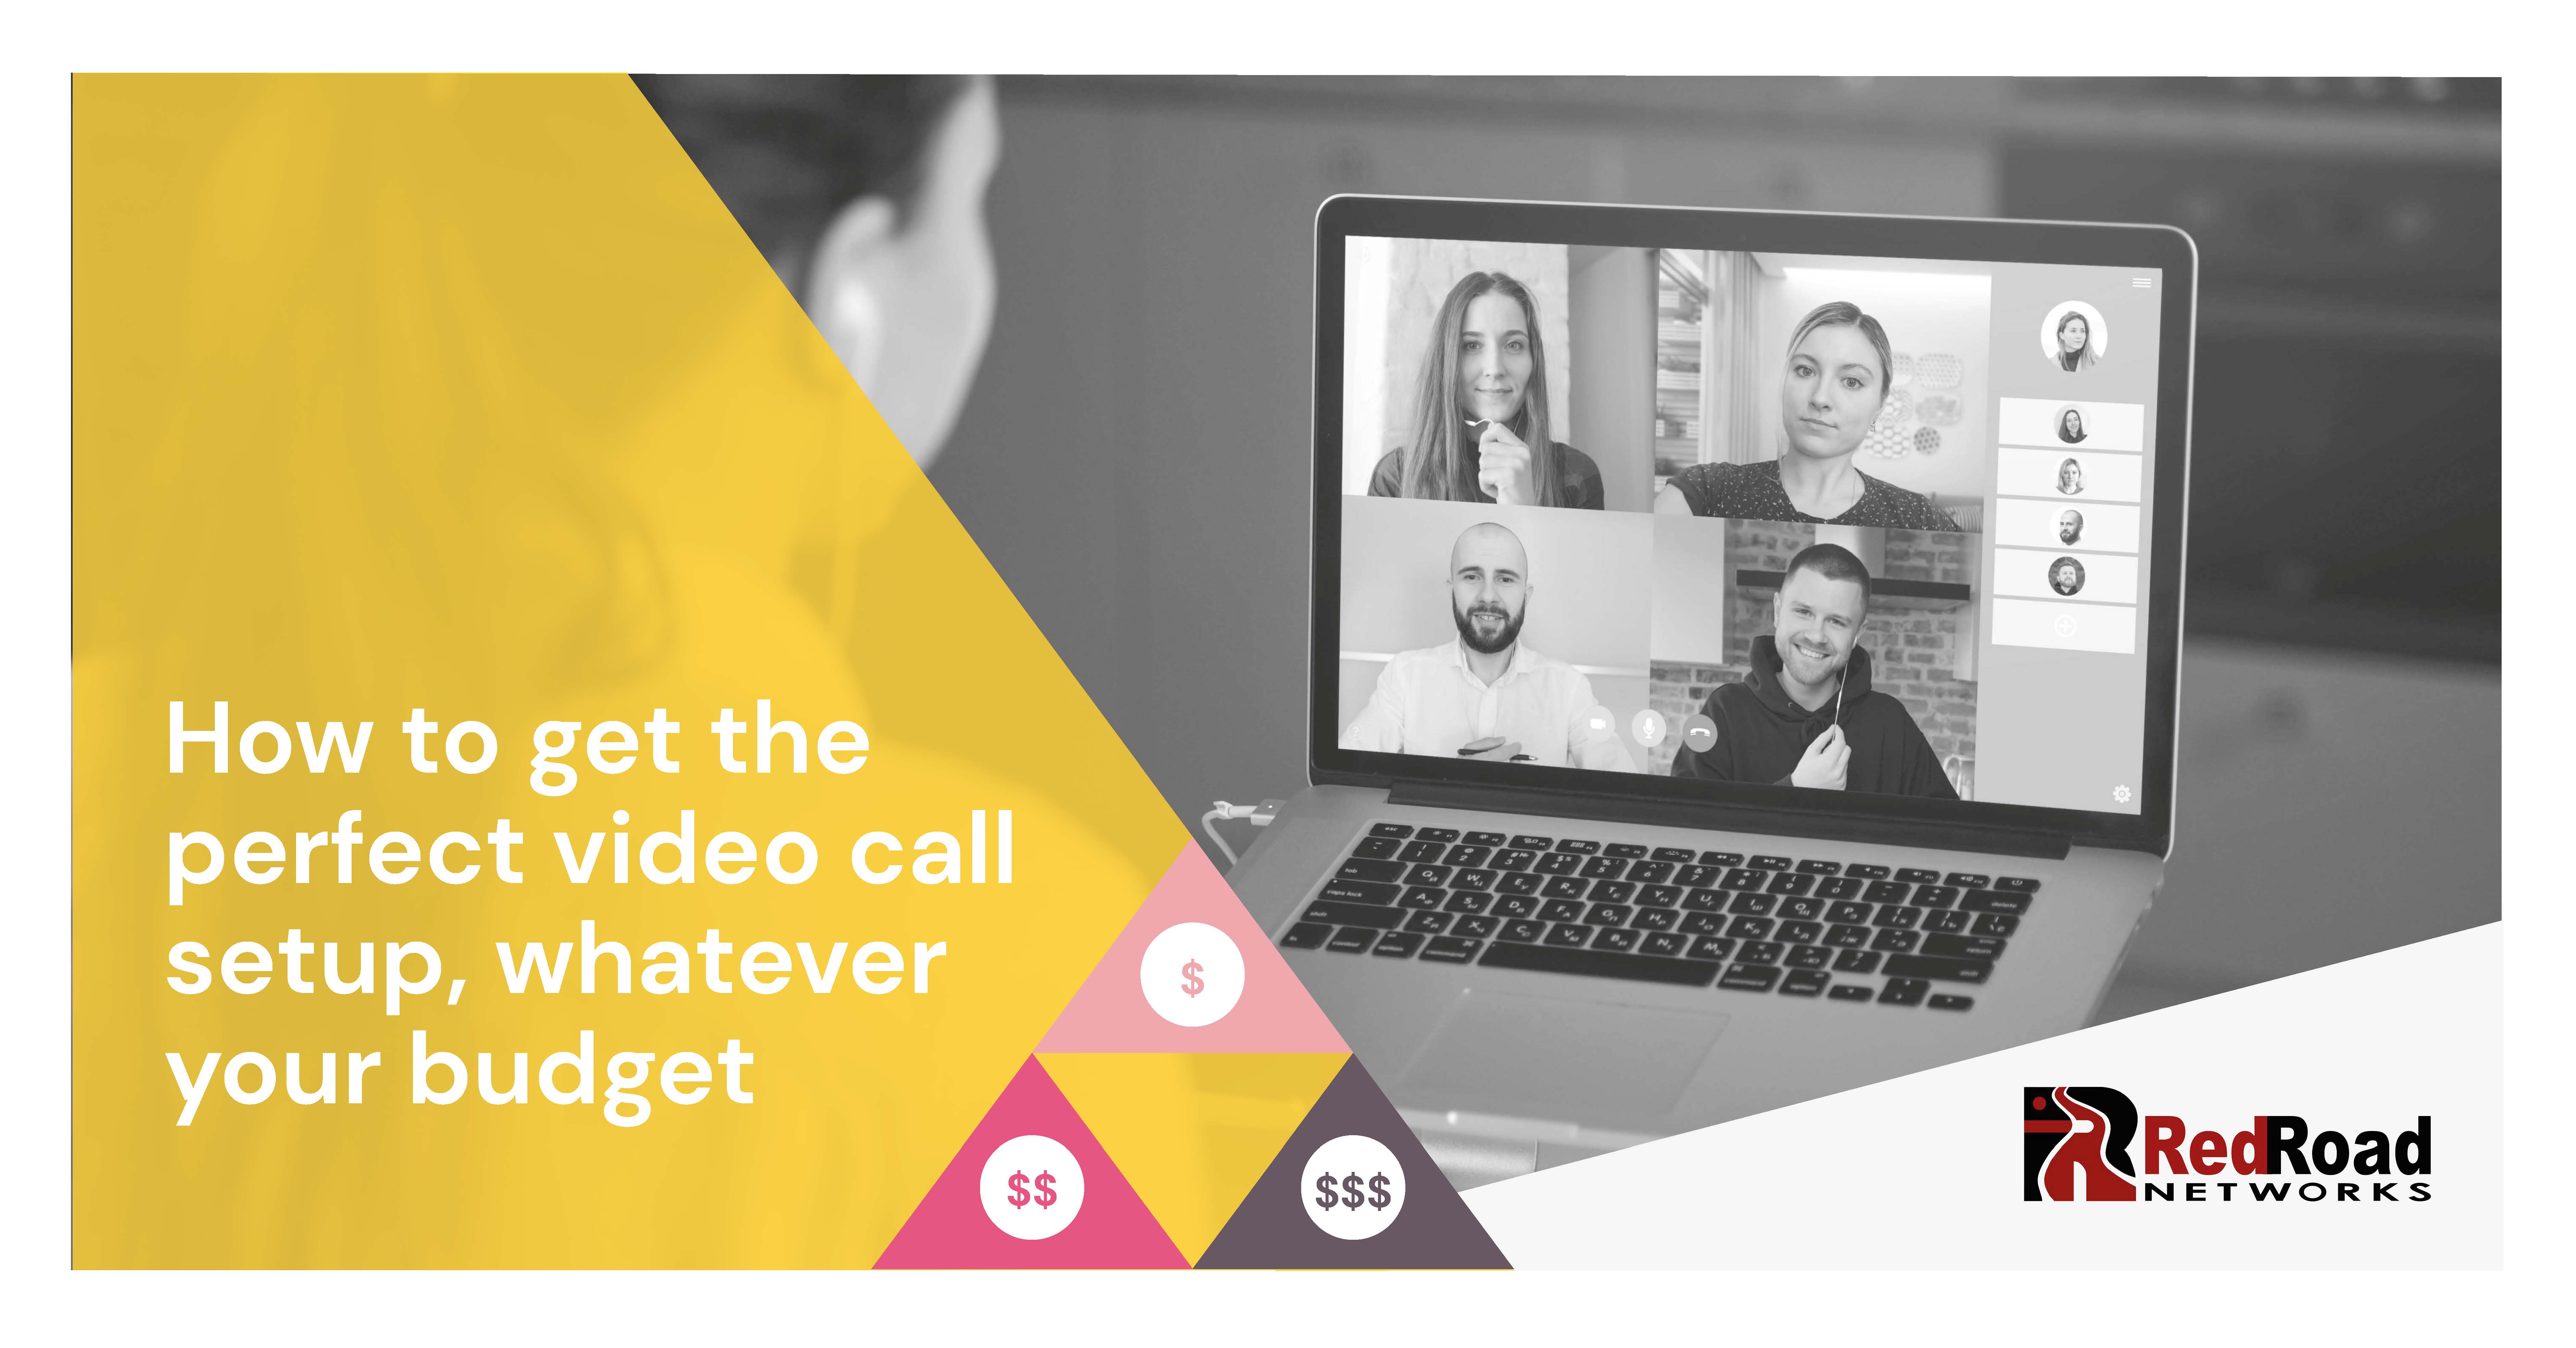 How to get the perfect video call setup, whatever your budget.